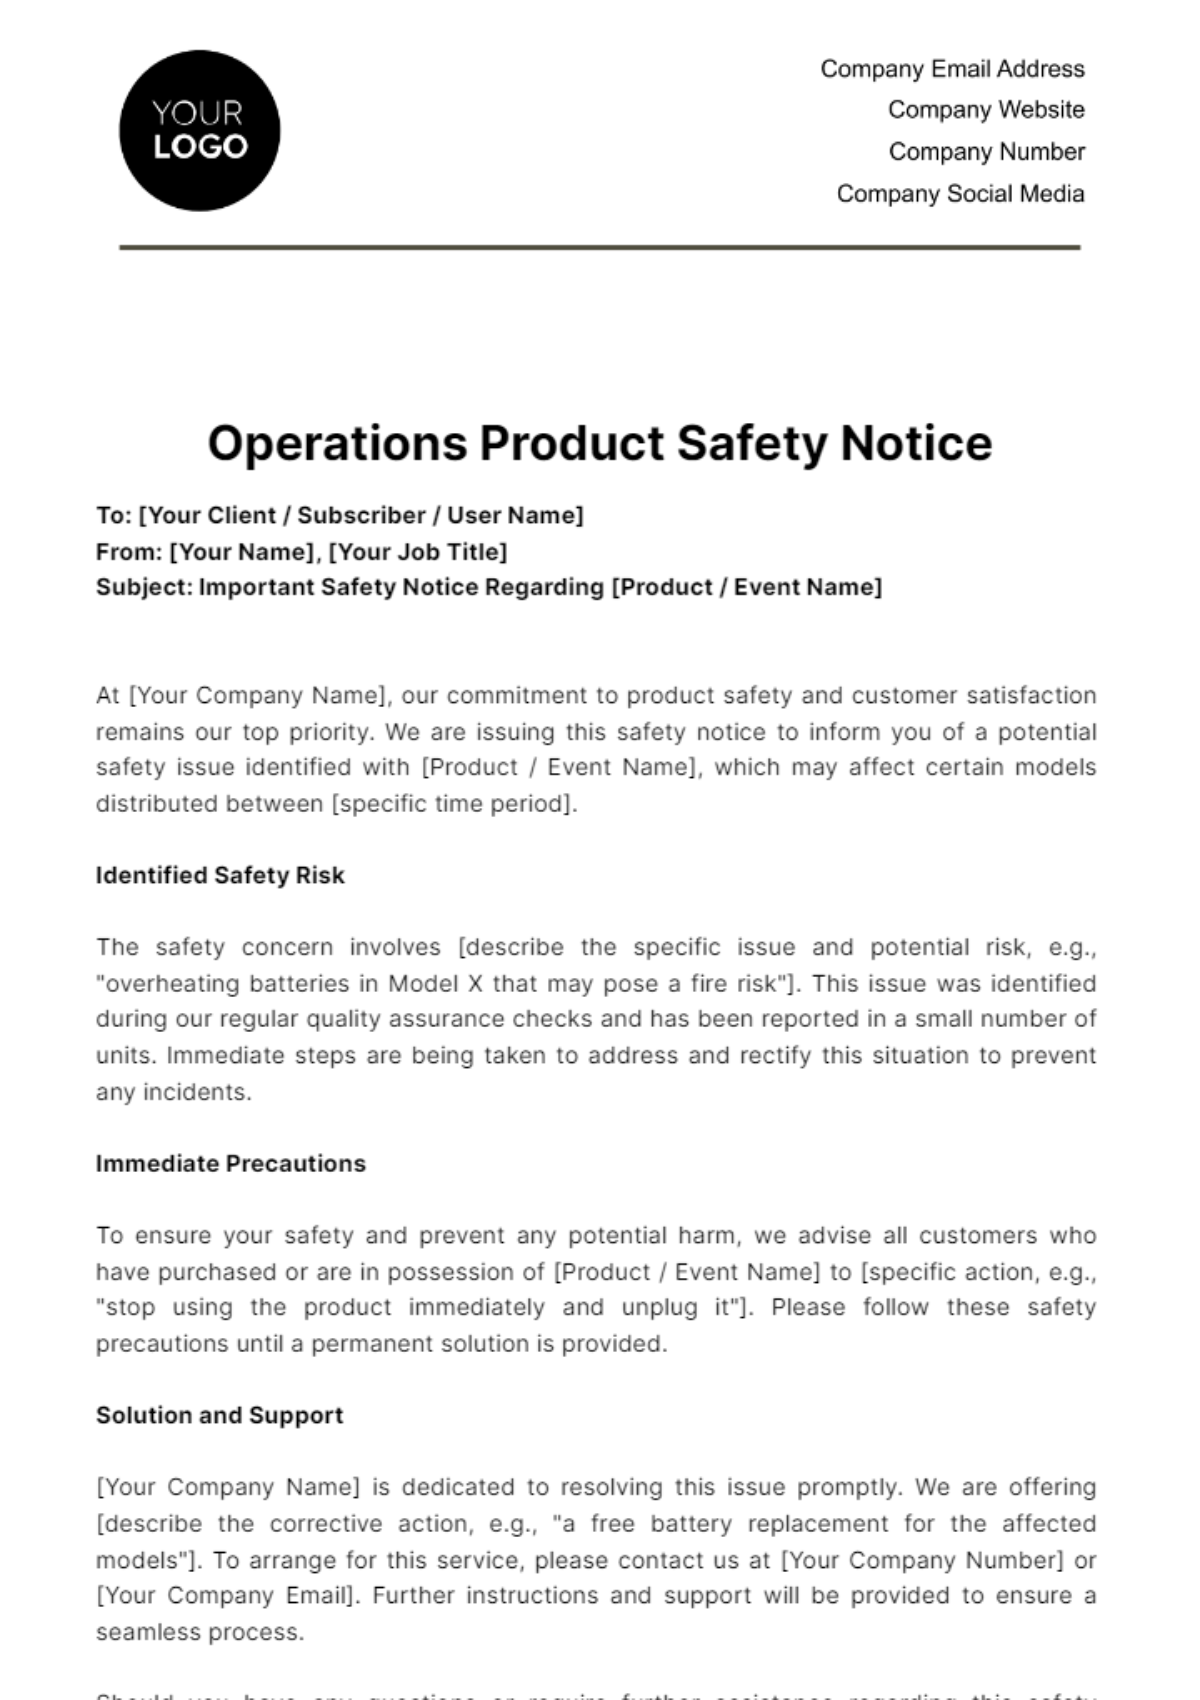 Operations Product Safety Notice Template